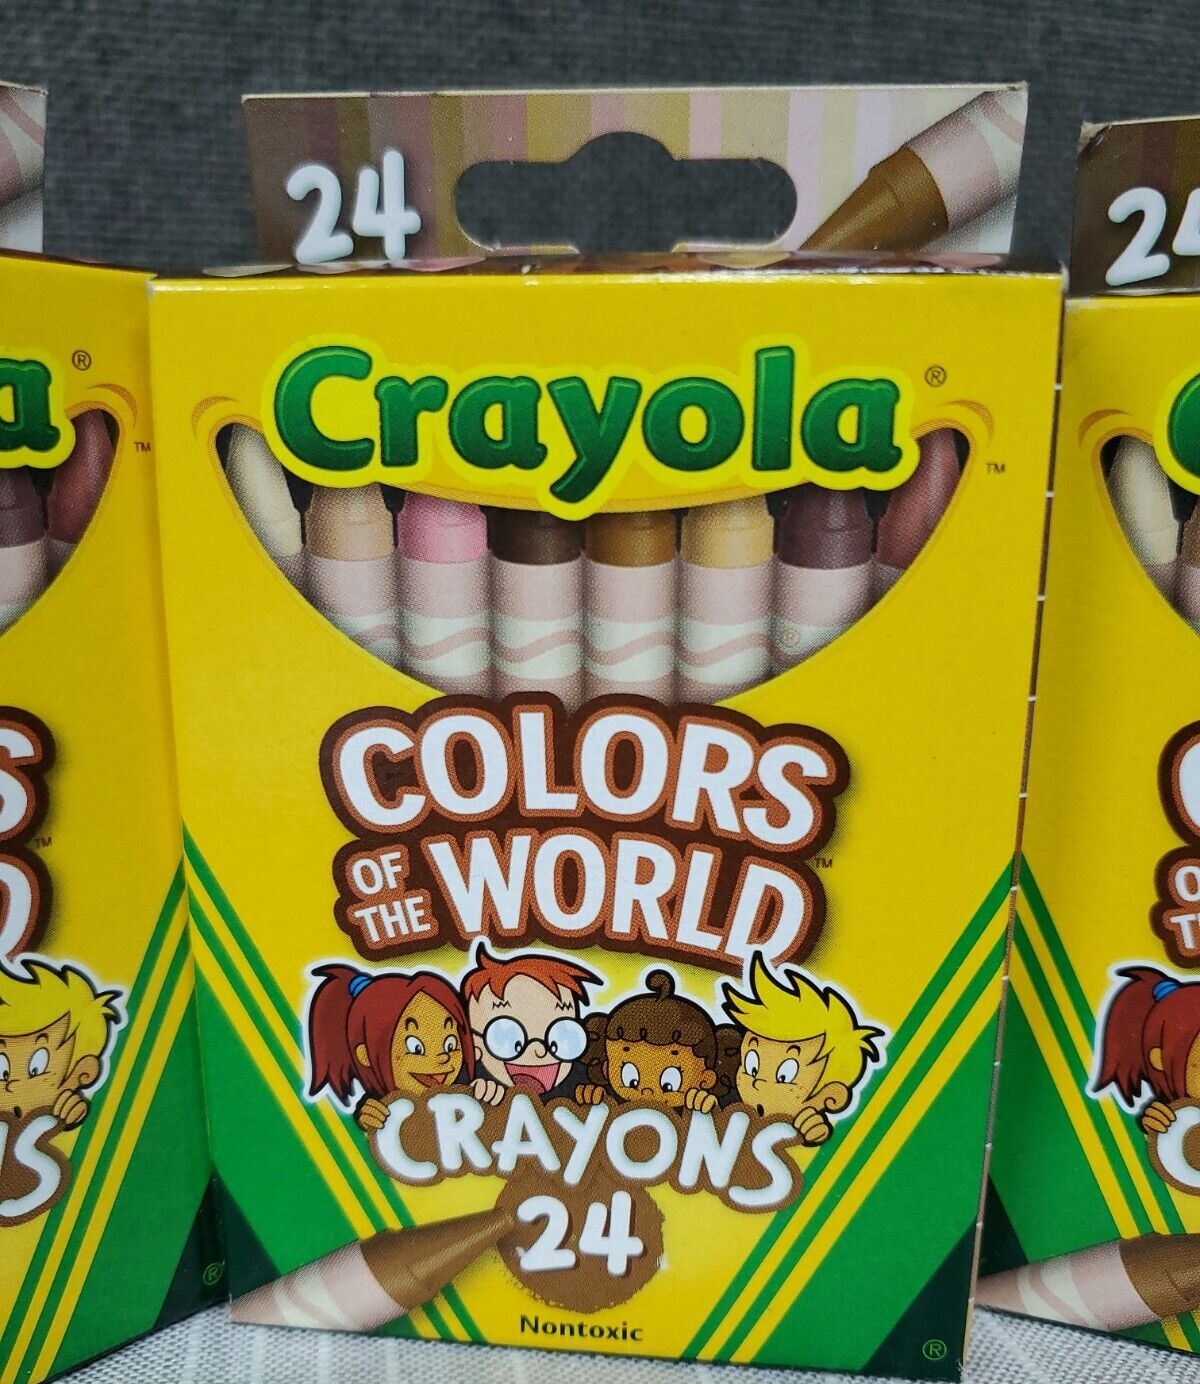 24 Count Crayola Colors of the World